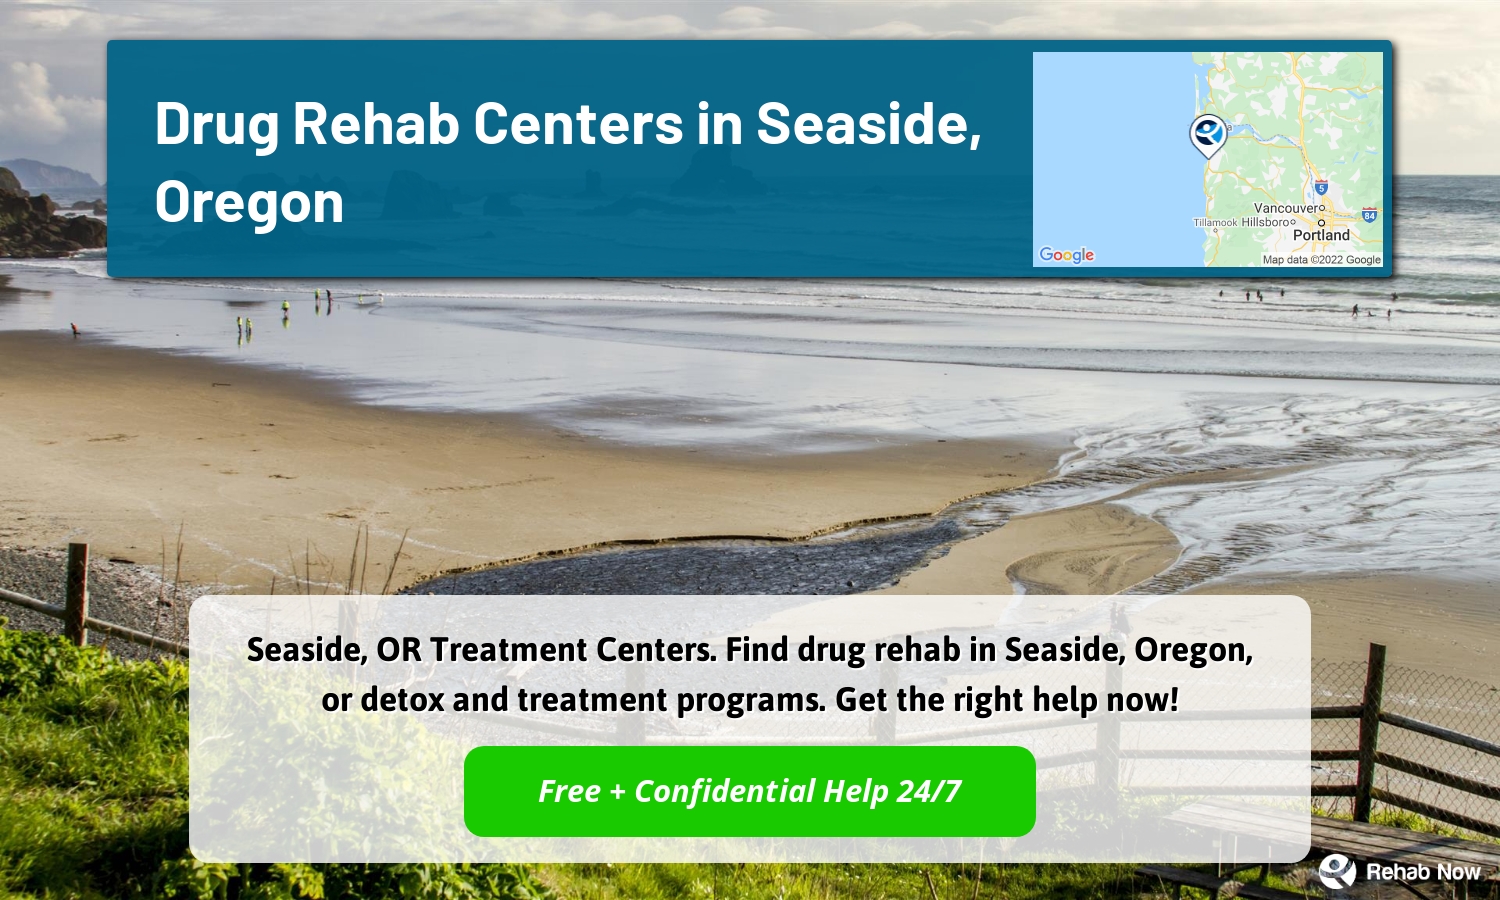 Seaside, OR Treatment Centers. Find drug rehab in Seaside, Oregon, or detox and treatment programs. Get the right help now!